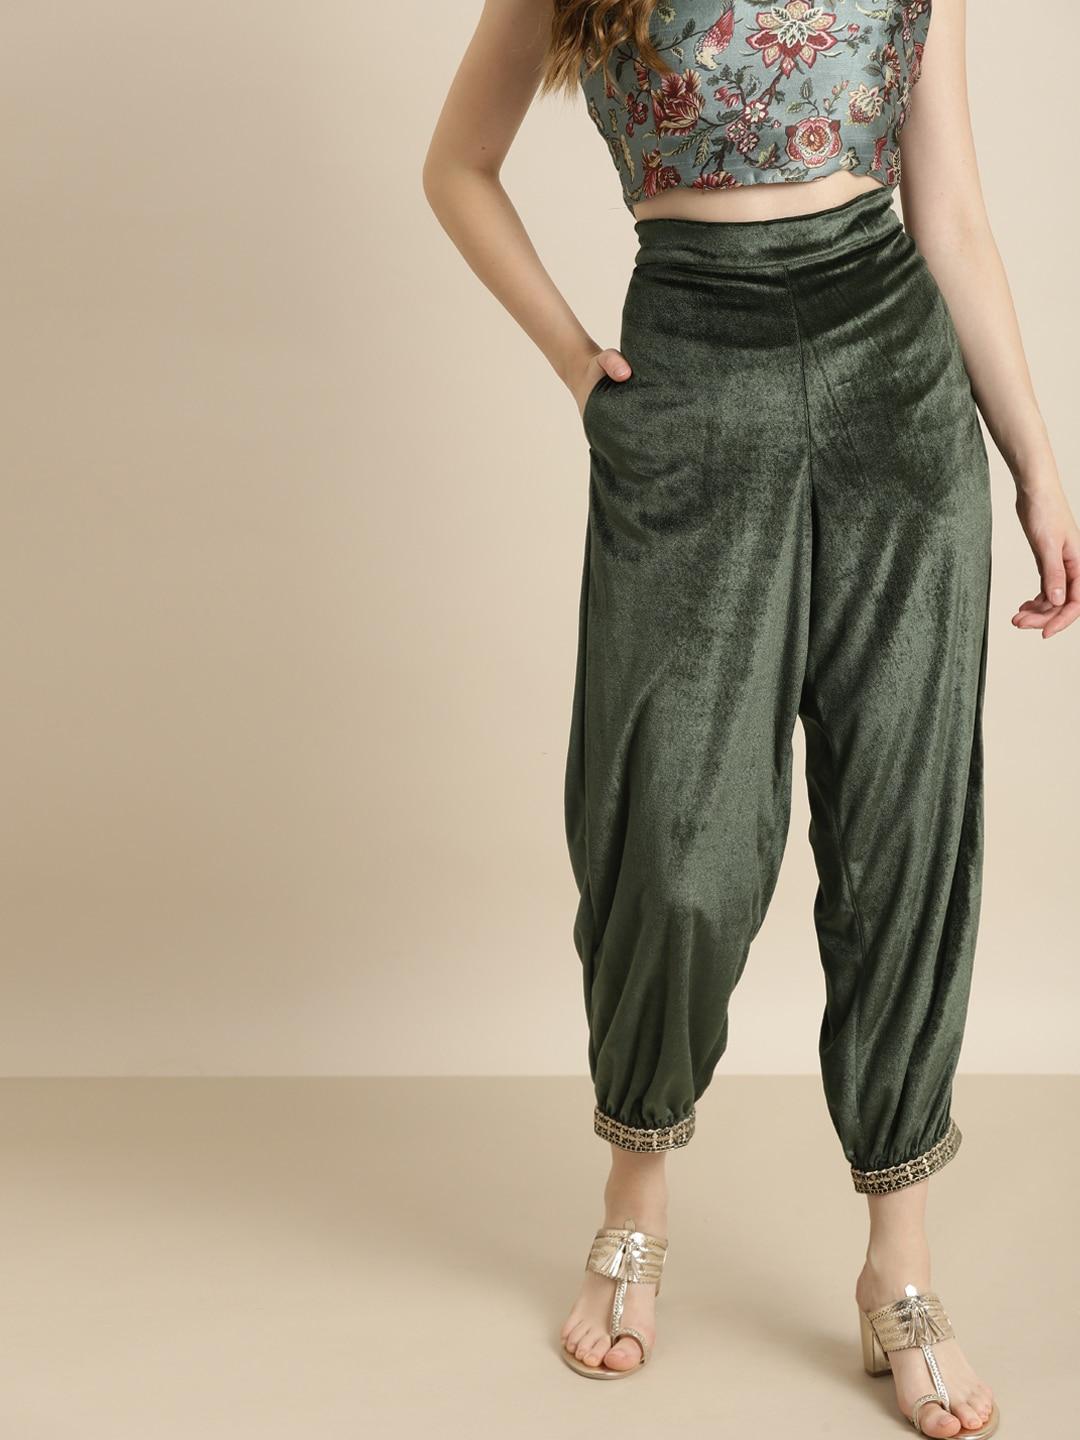 shae-by-sassafras-women-olive-green-trousers